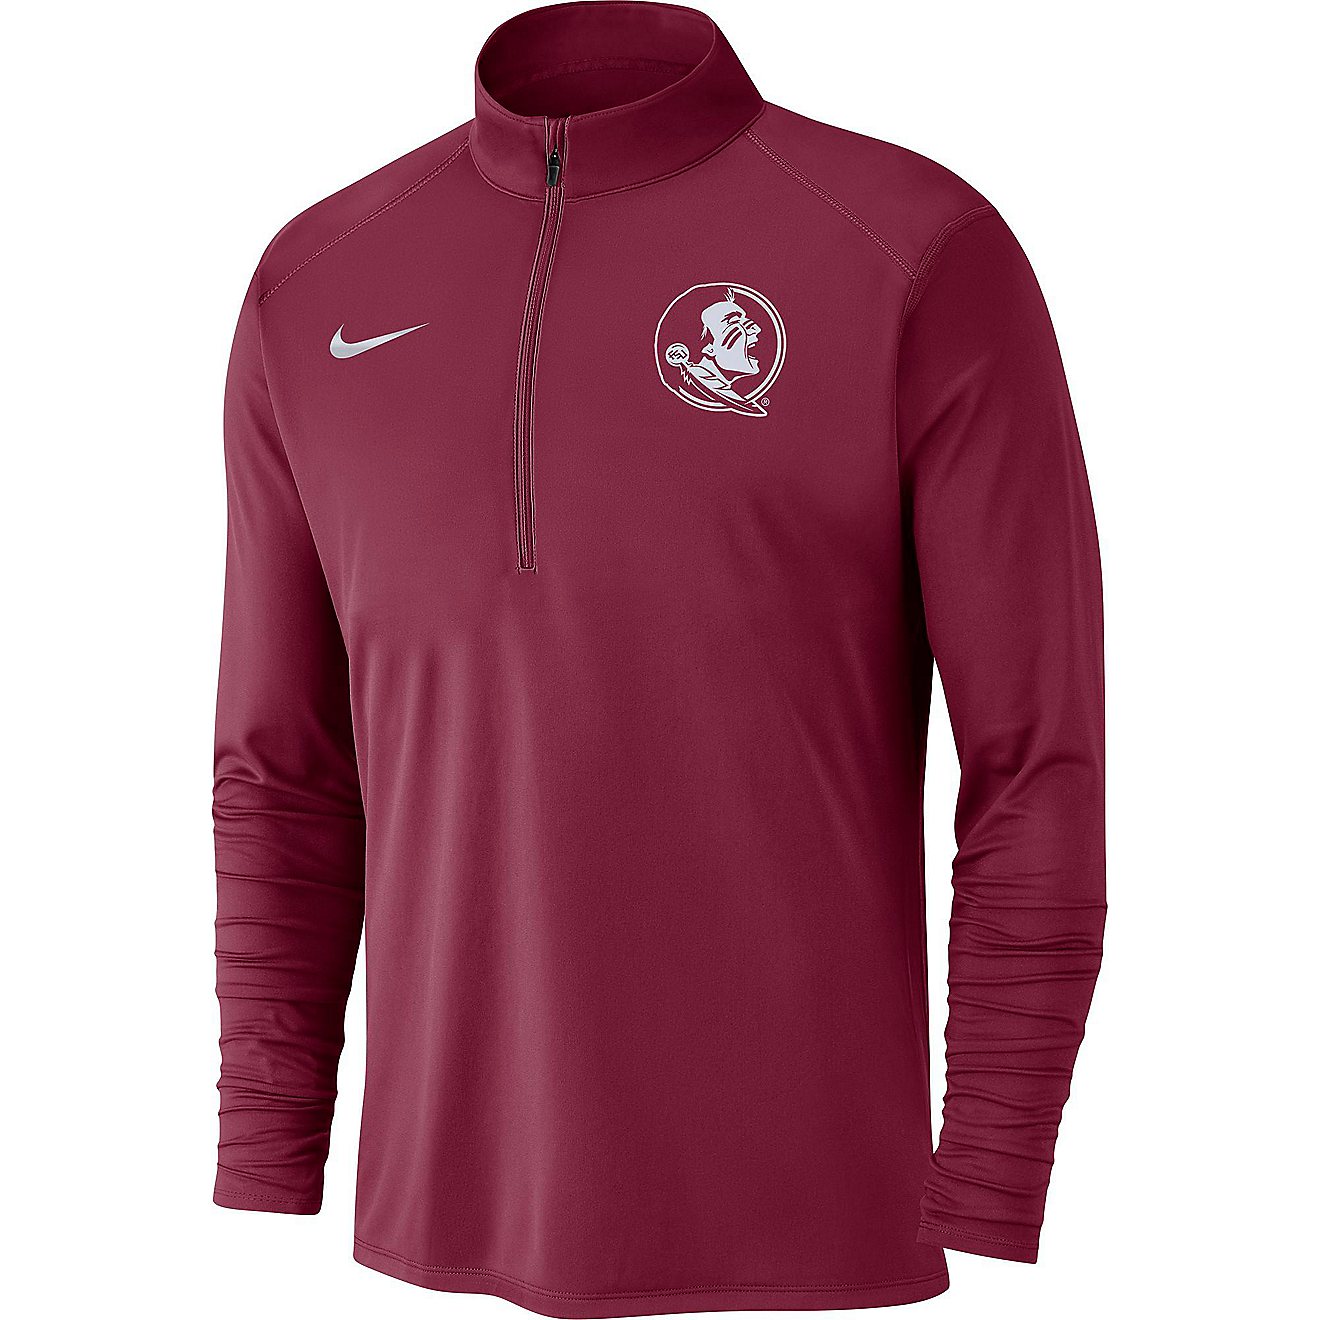 Nike Men's Florida State University Dri-FIT QZ Pacer Long Sleeve Top                                                             - view number 1